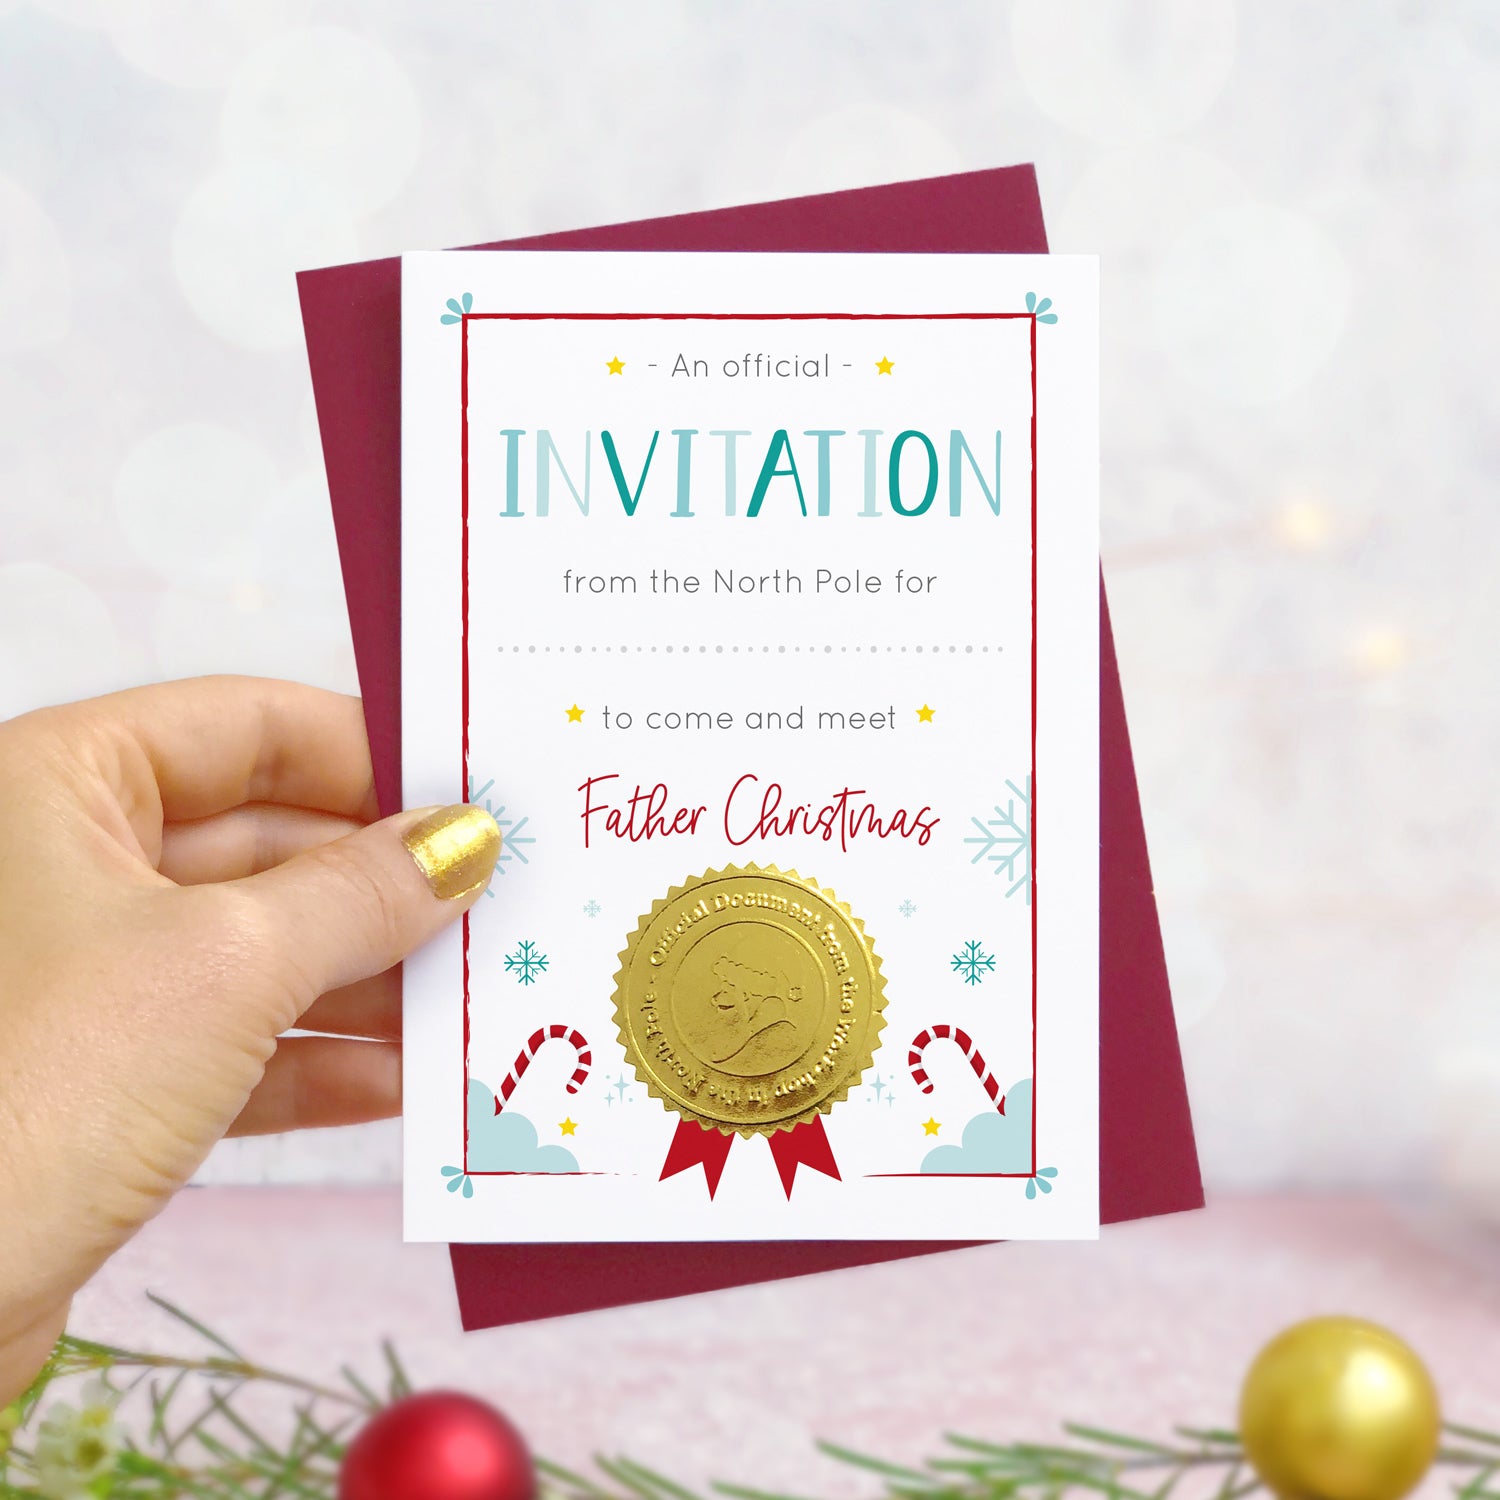 An invitation certificate to visit Santa (or Father Christmas) photographed in hand in front of a grey and dusty pink background with foliage and baubles in the foreground. The card has a blank space for you to write a childs name. It also features a shiny gold seal with the face of a santa character.